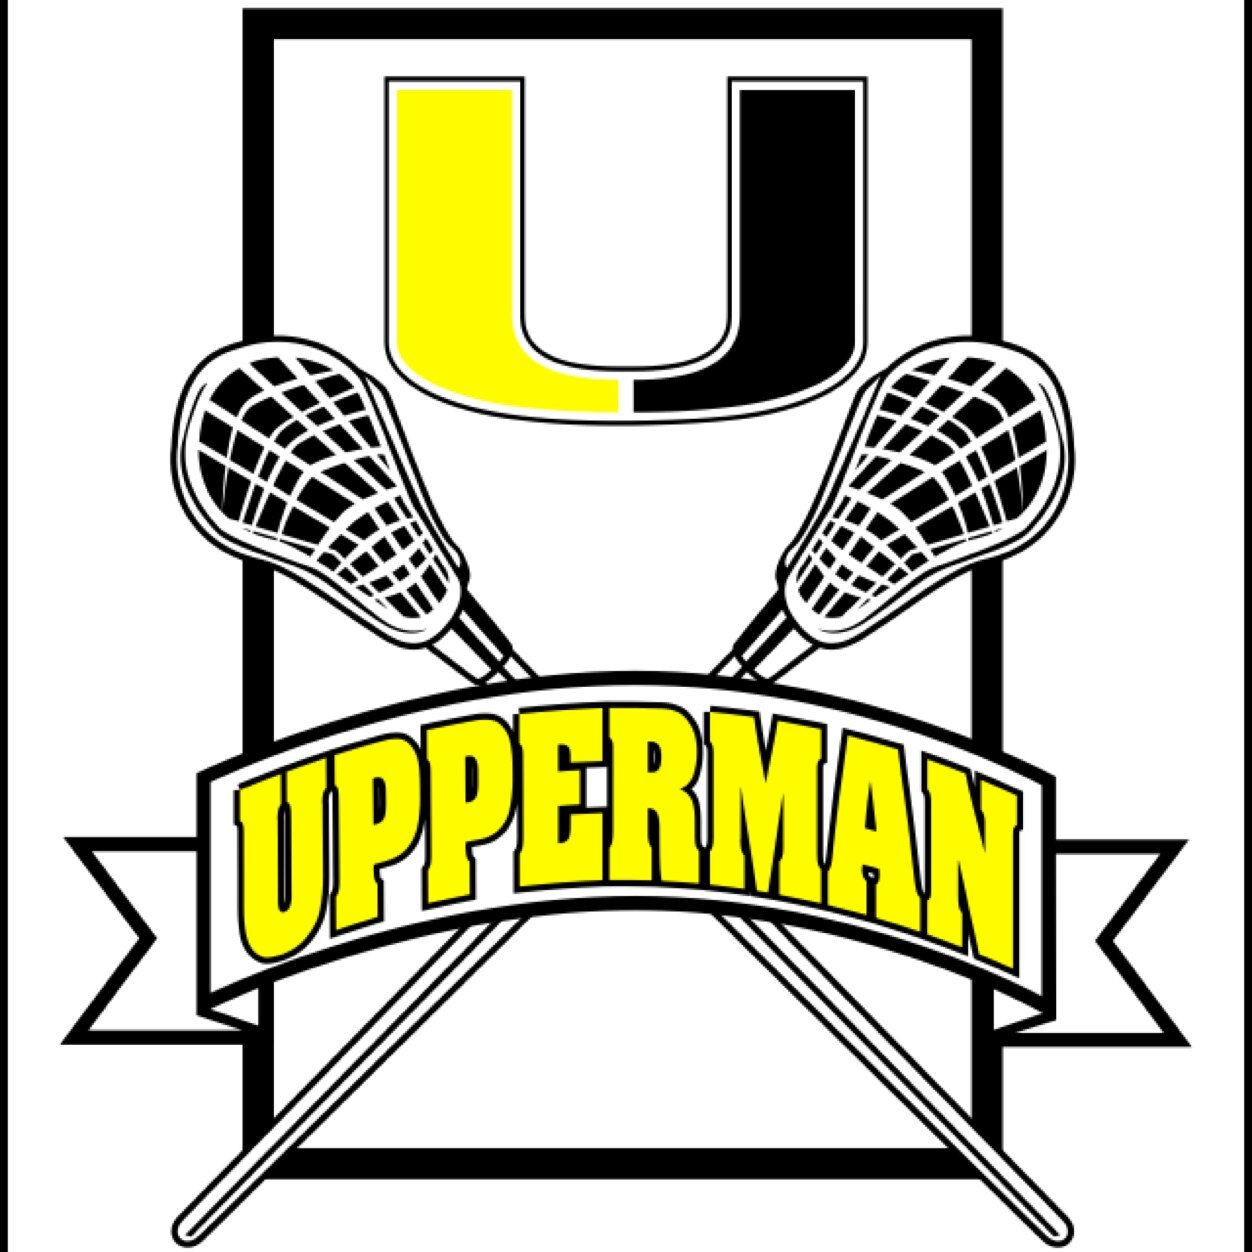 UHS lacrosse is a proud Sport of Upperman High School and TSSAA #GoBees